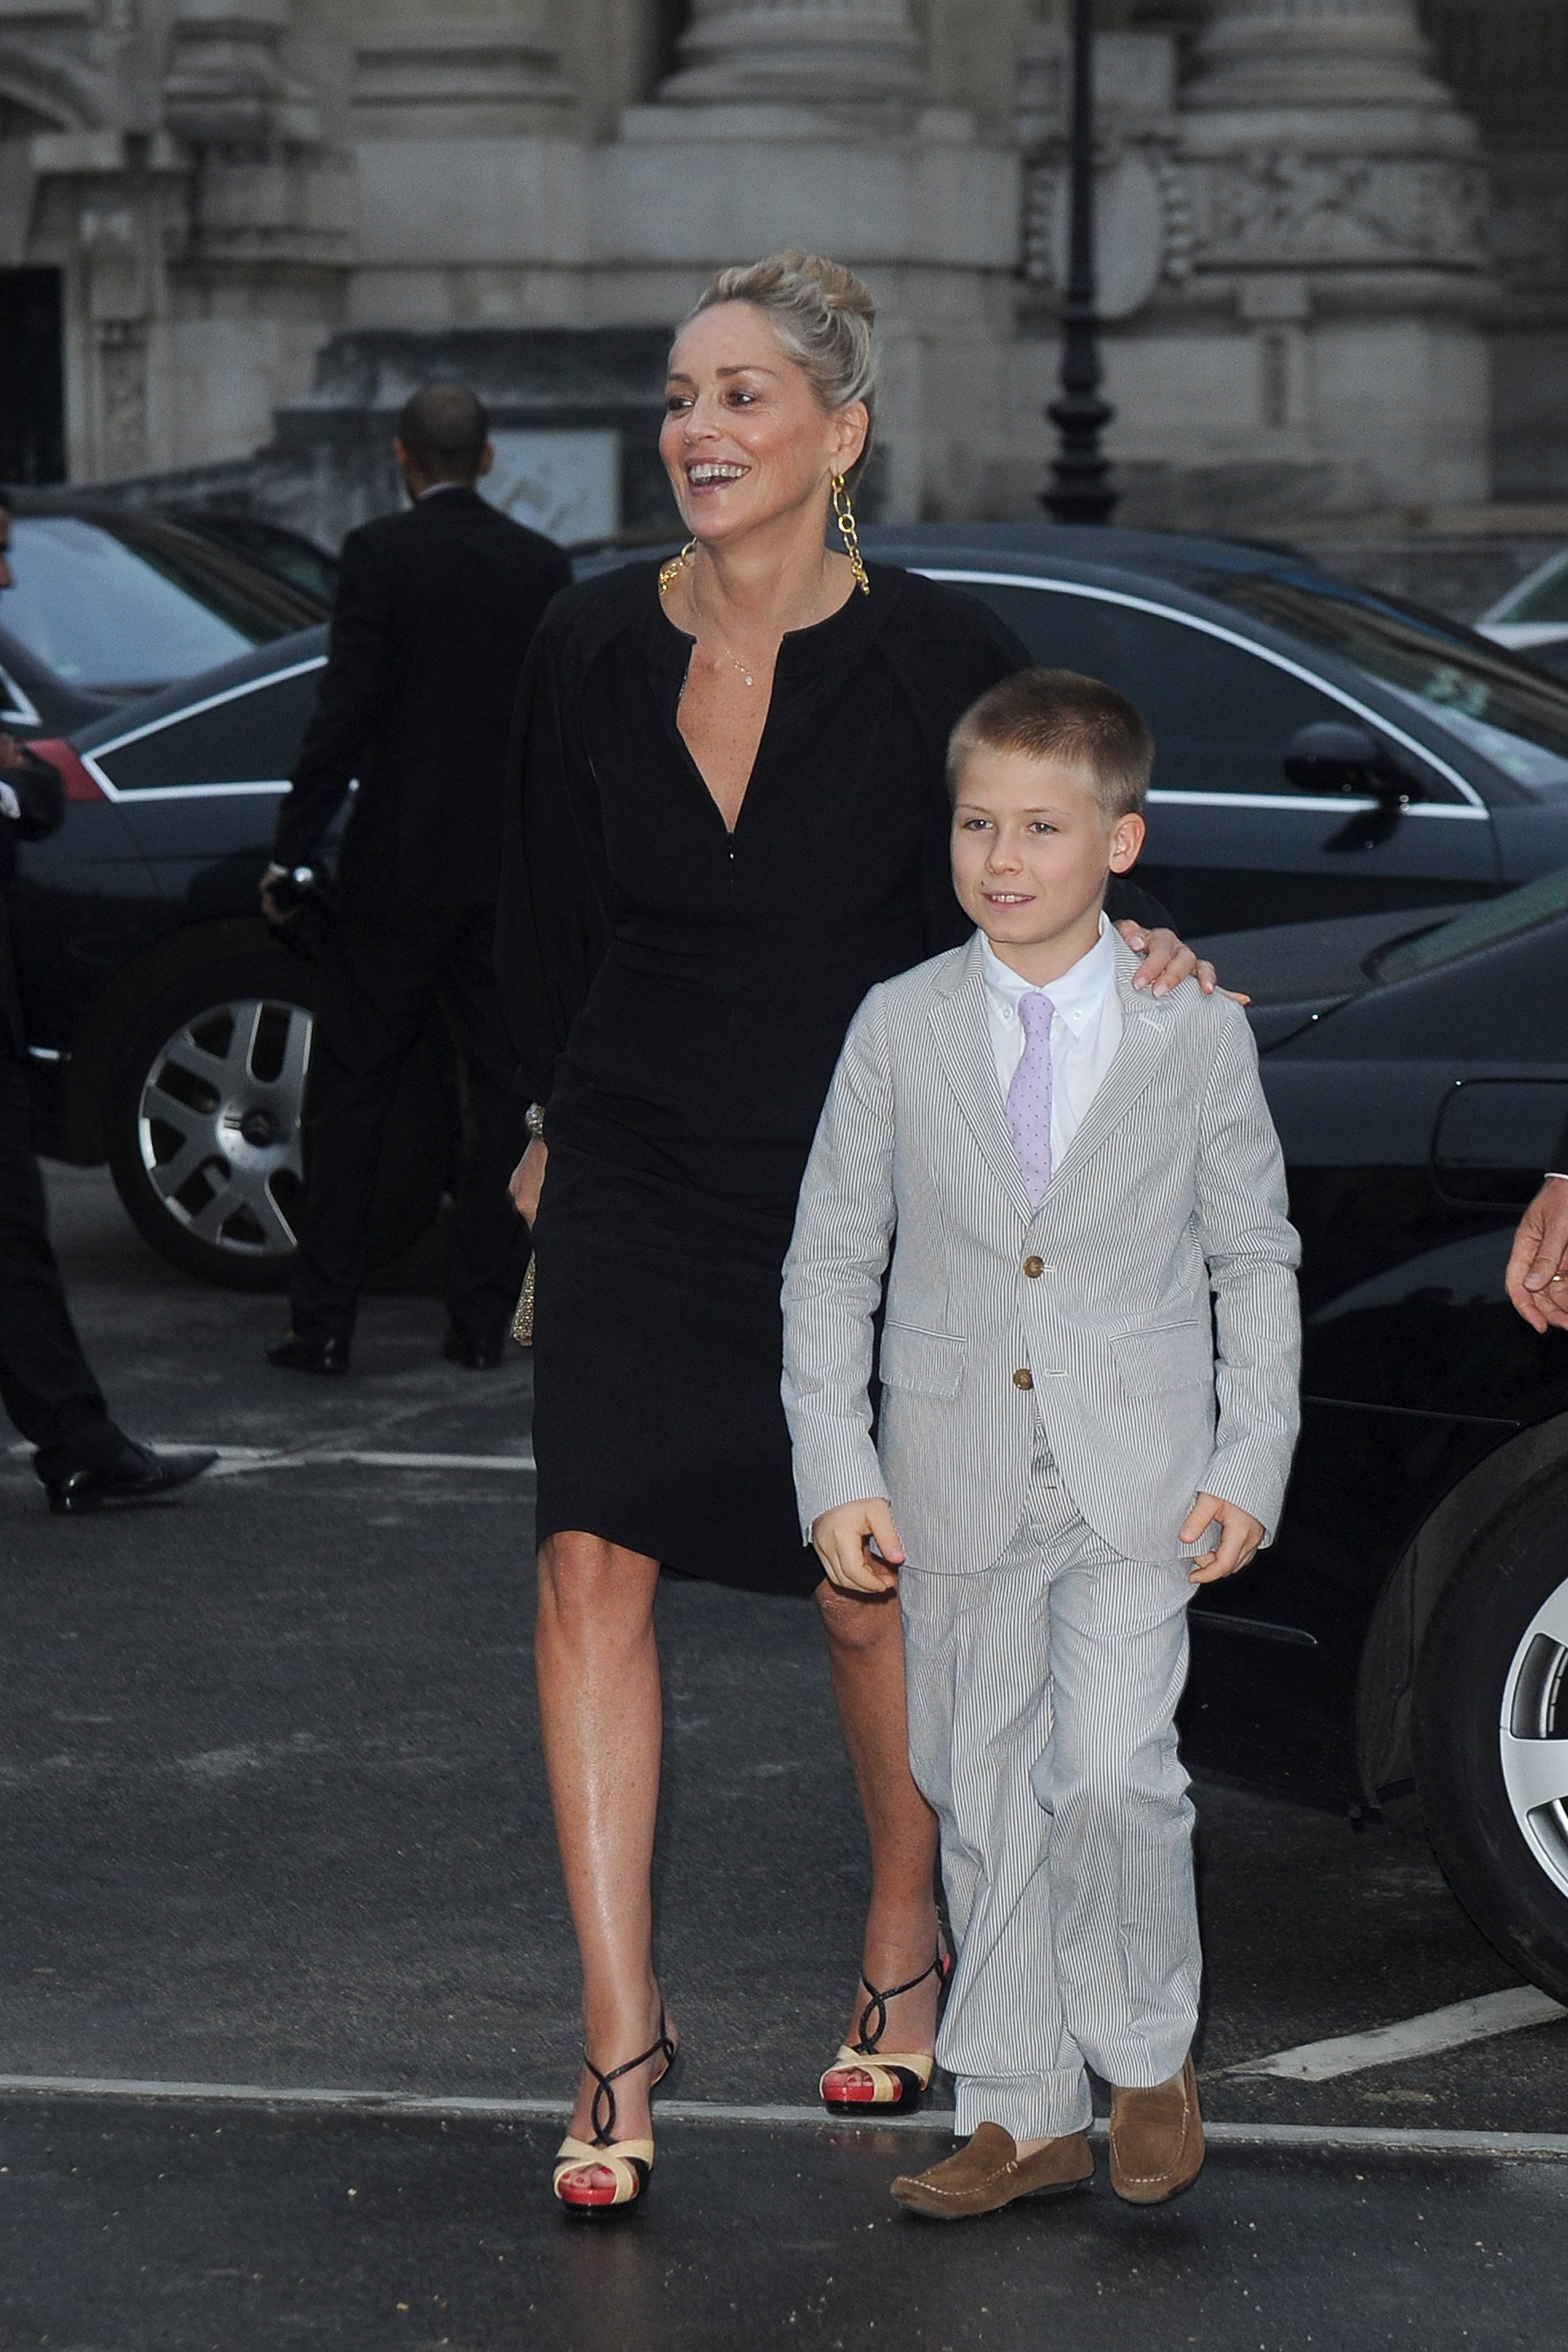 Sharon Stone and her son at "The Glory Of Water: Karl Lagerfeld's Exhibition Dinner" on July 3, 2013, in Paris, France. | Source: Jacopo Raule/FilmMagic/Getty Images